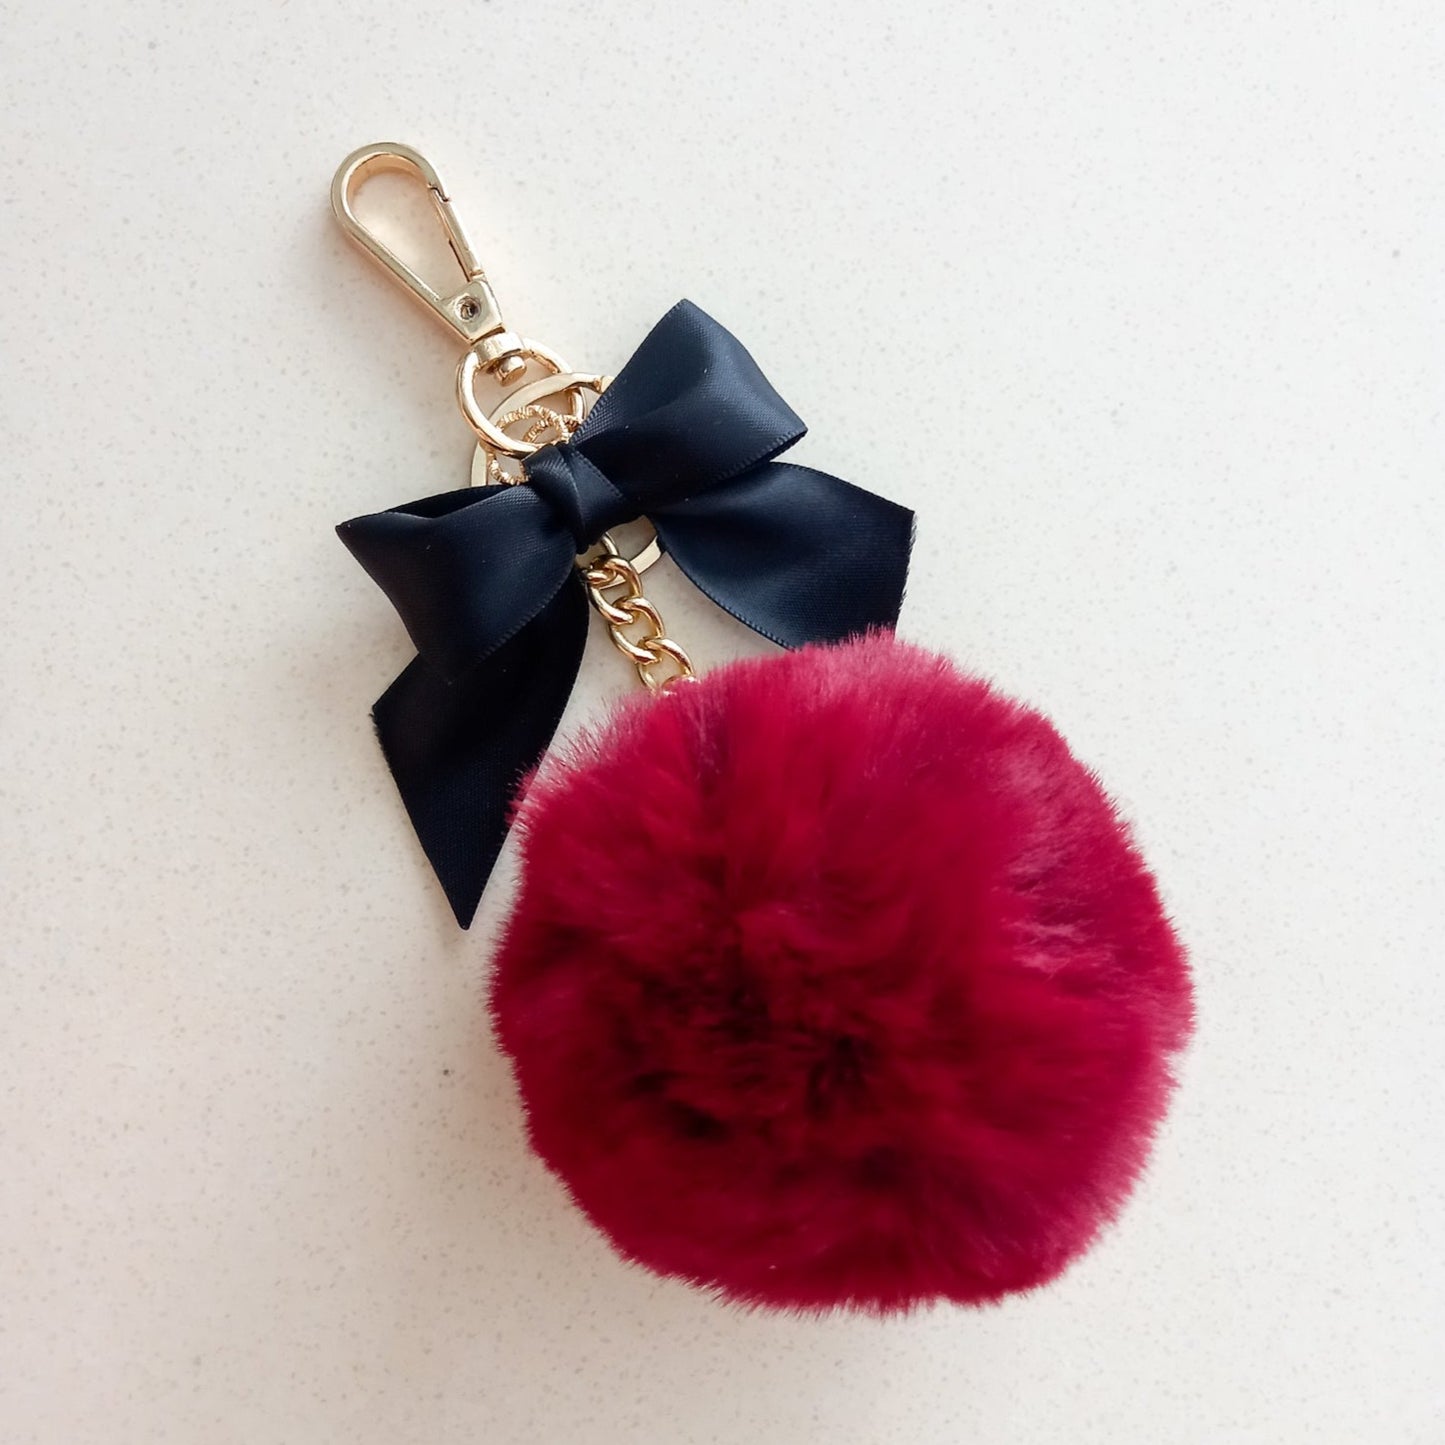 Pom pom your keys with a Monogrammed Faux Fur Key Ring NEW from  Marleylilly!